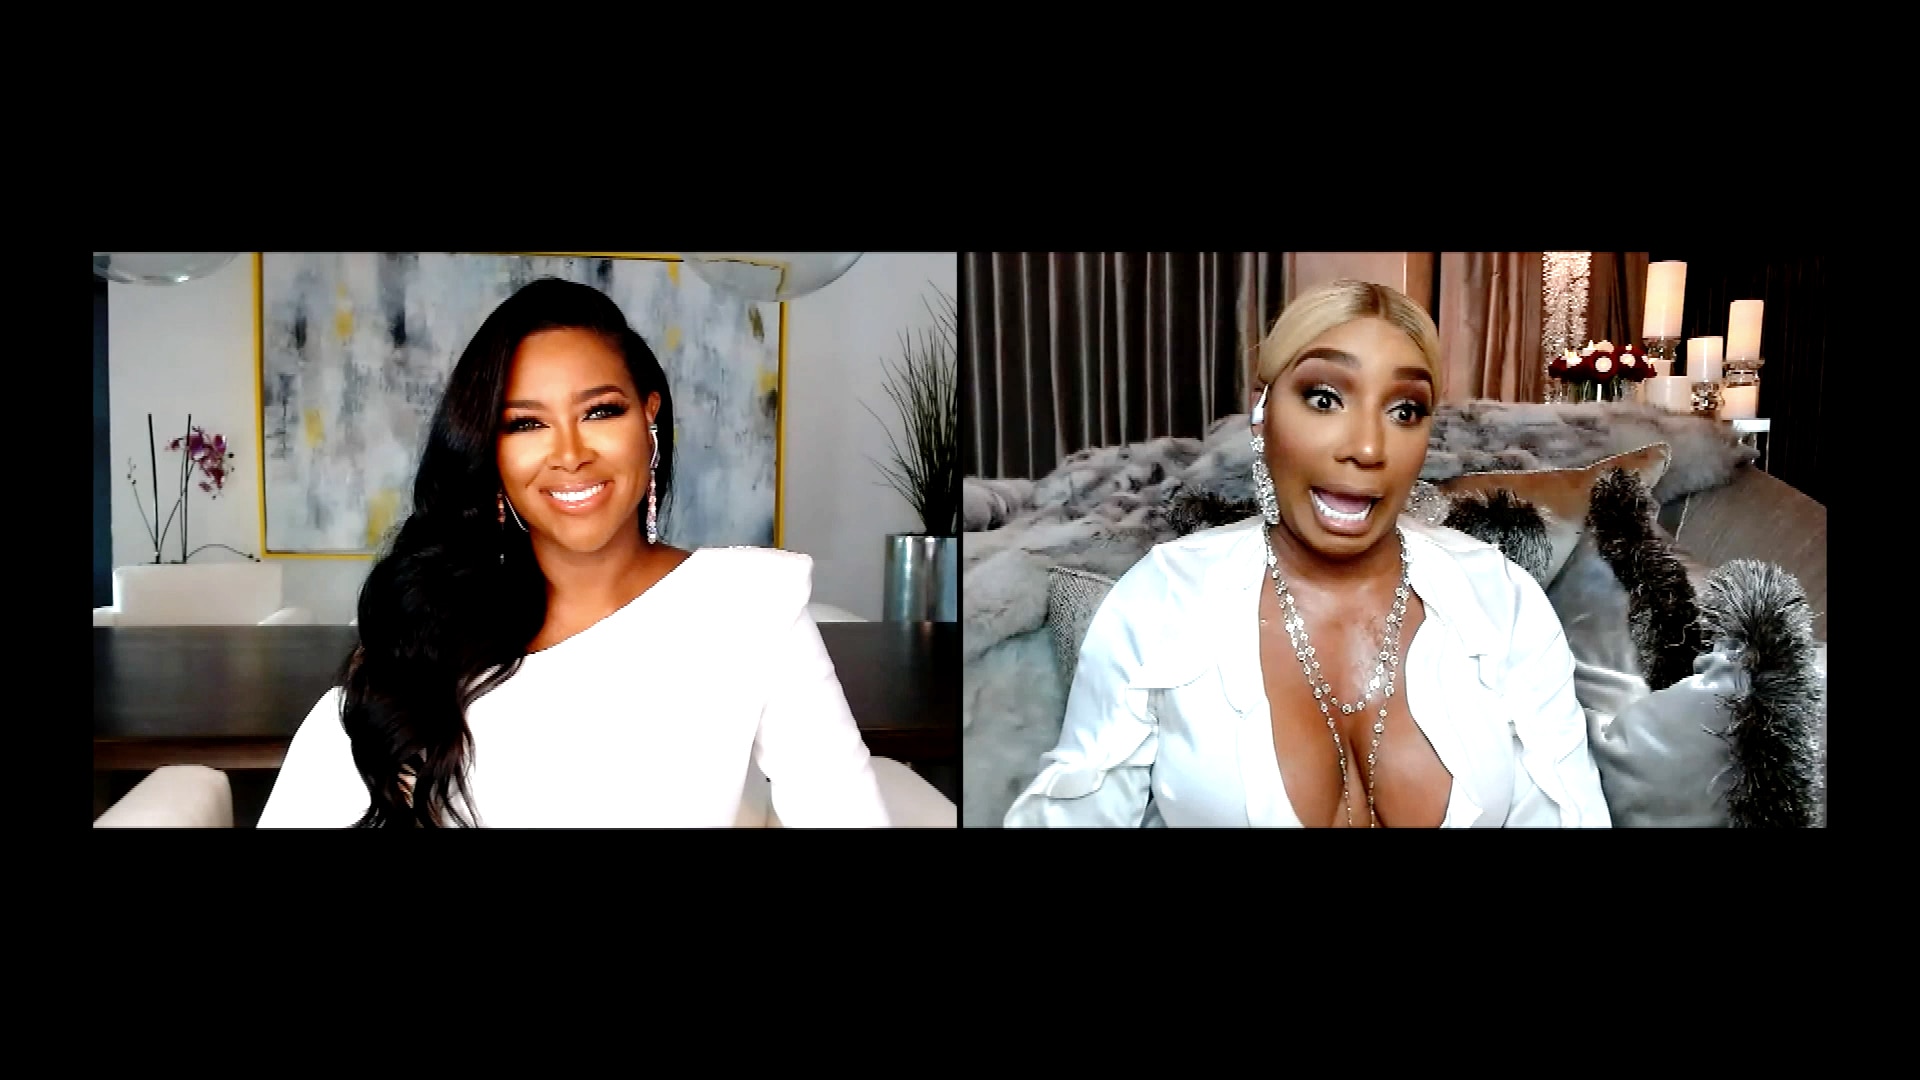 Watch Nene Leakes and Kenya Moore Clash Within the First Minute of the Reunion Taping! The Real Housewives of Atlanta Season 12 photo